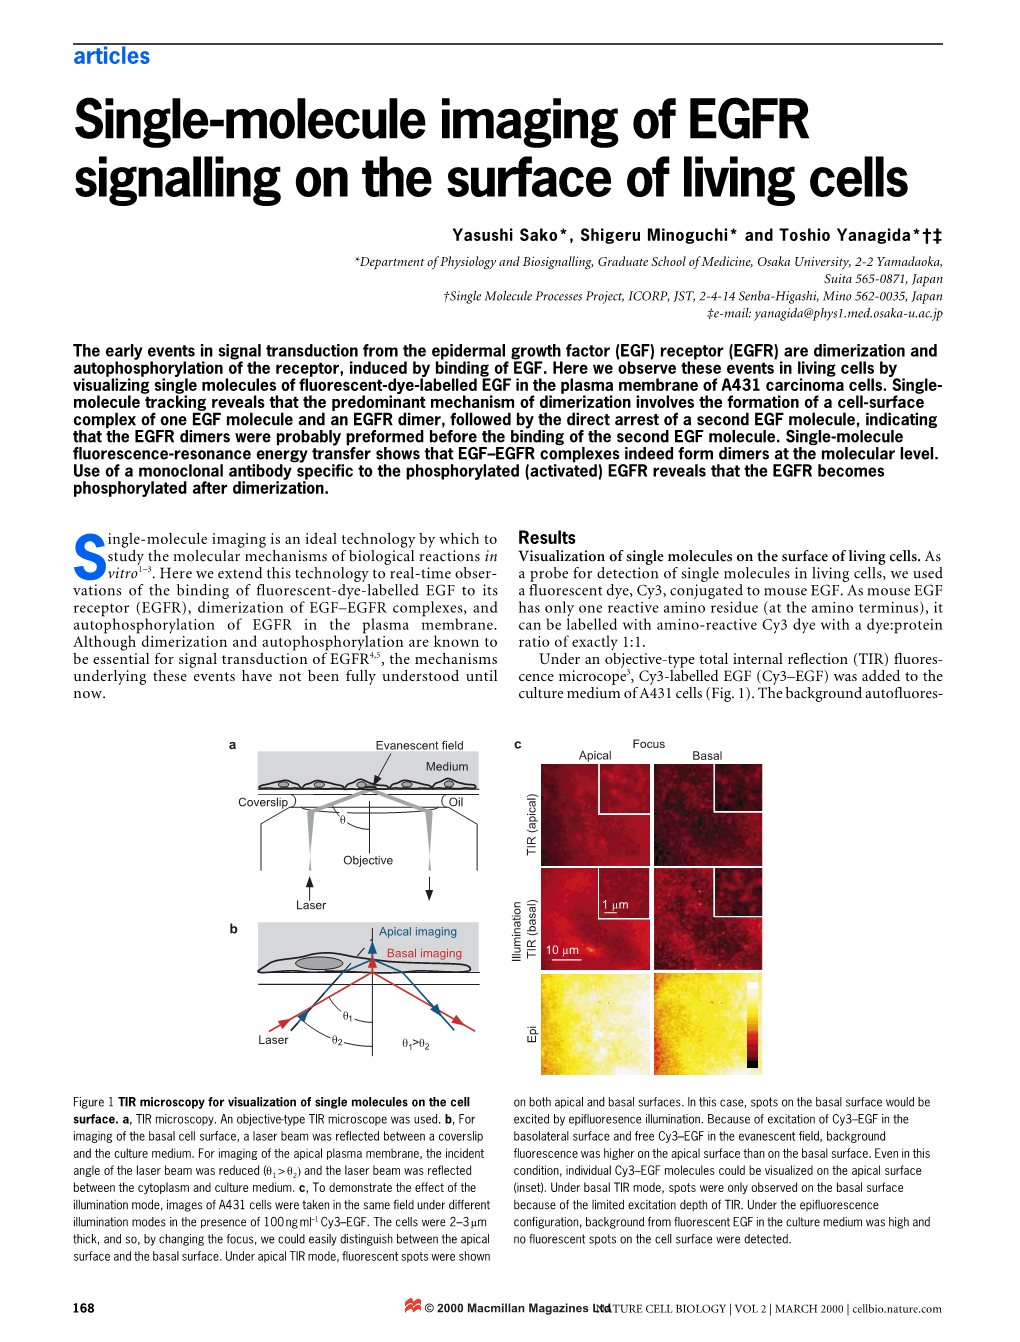 Single-Molecule Imaging of EGFR Signalling on the Surface of Living Cells